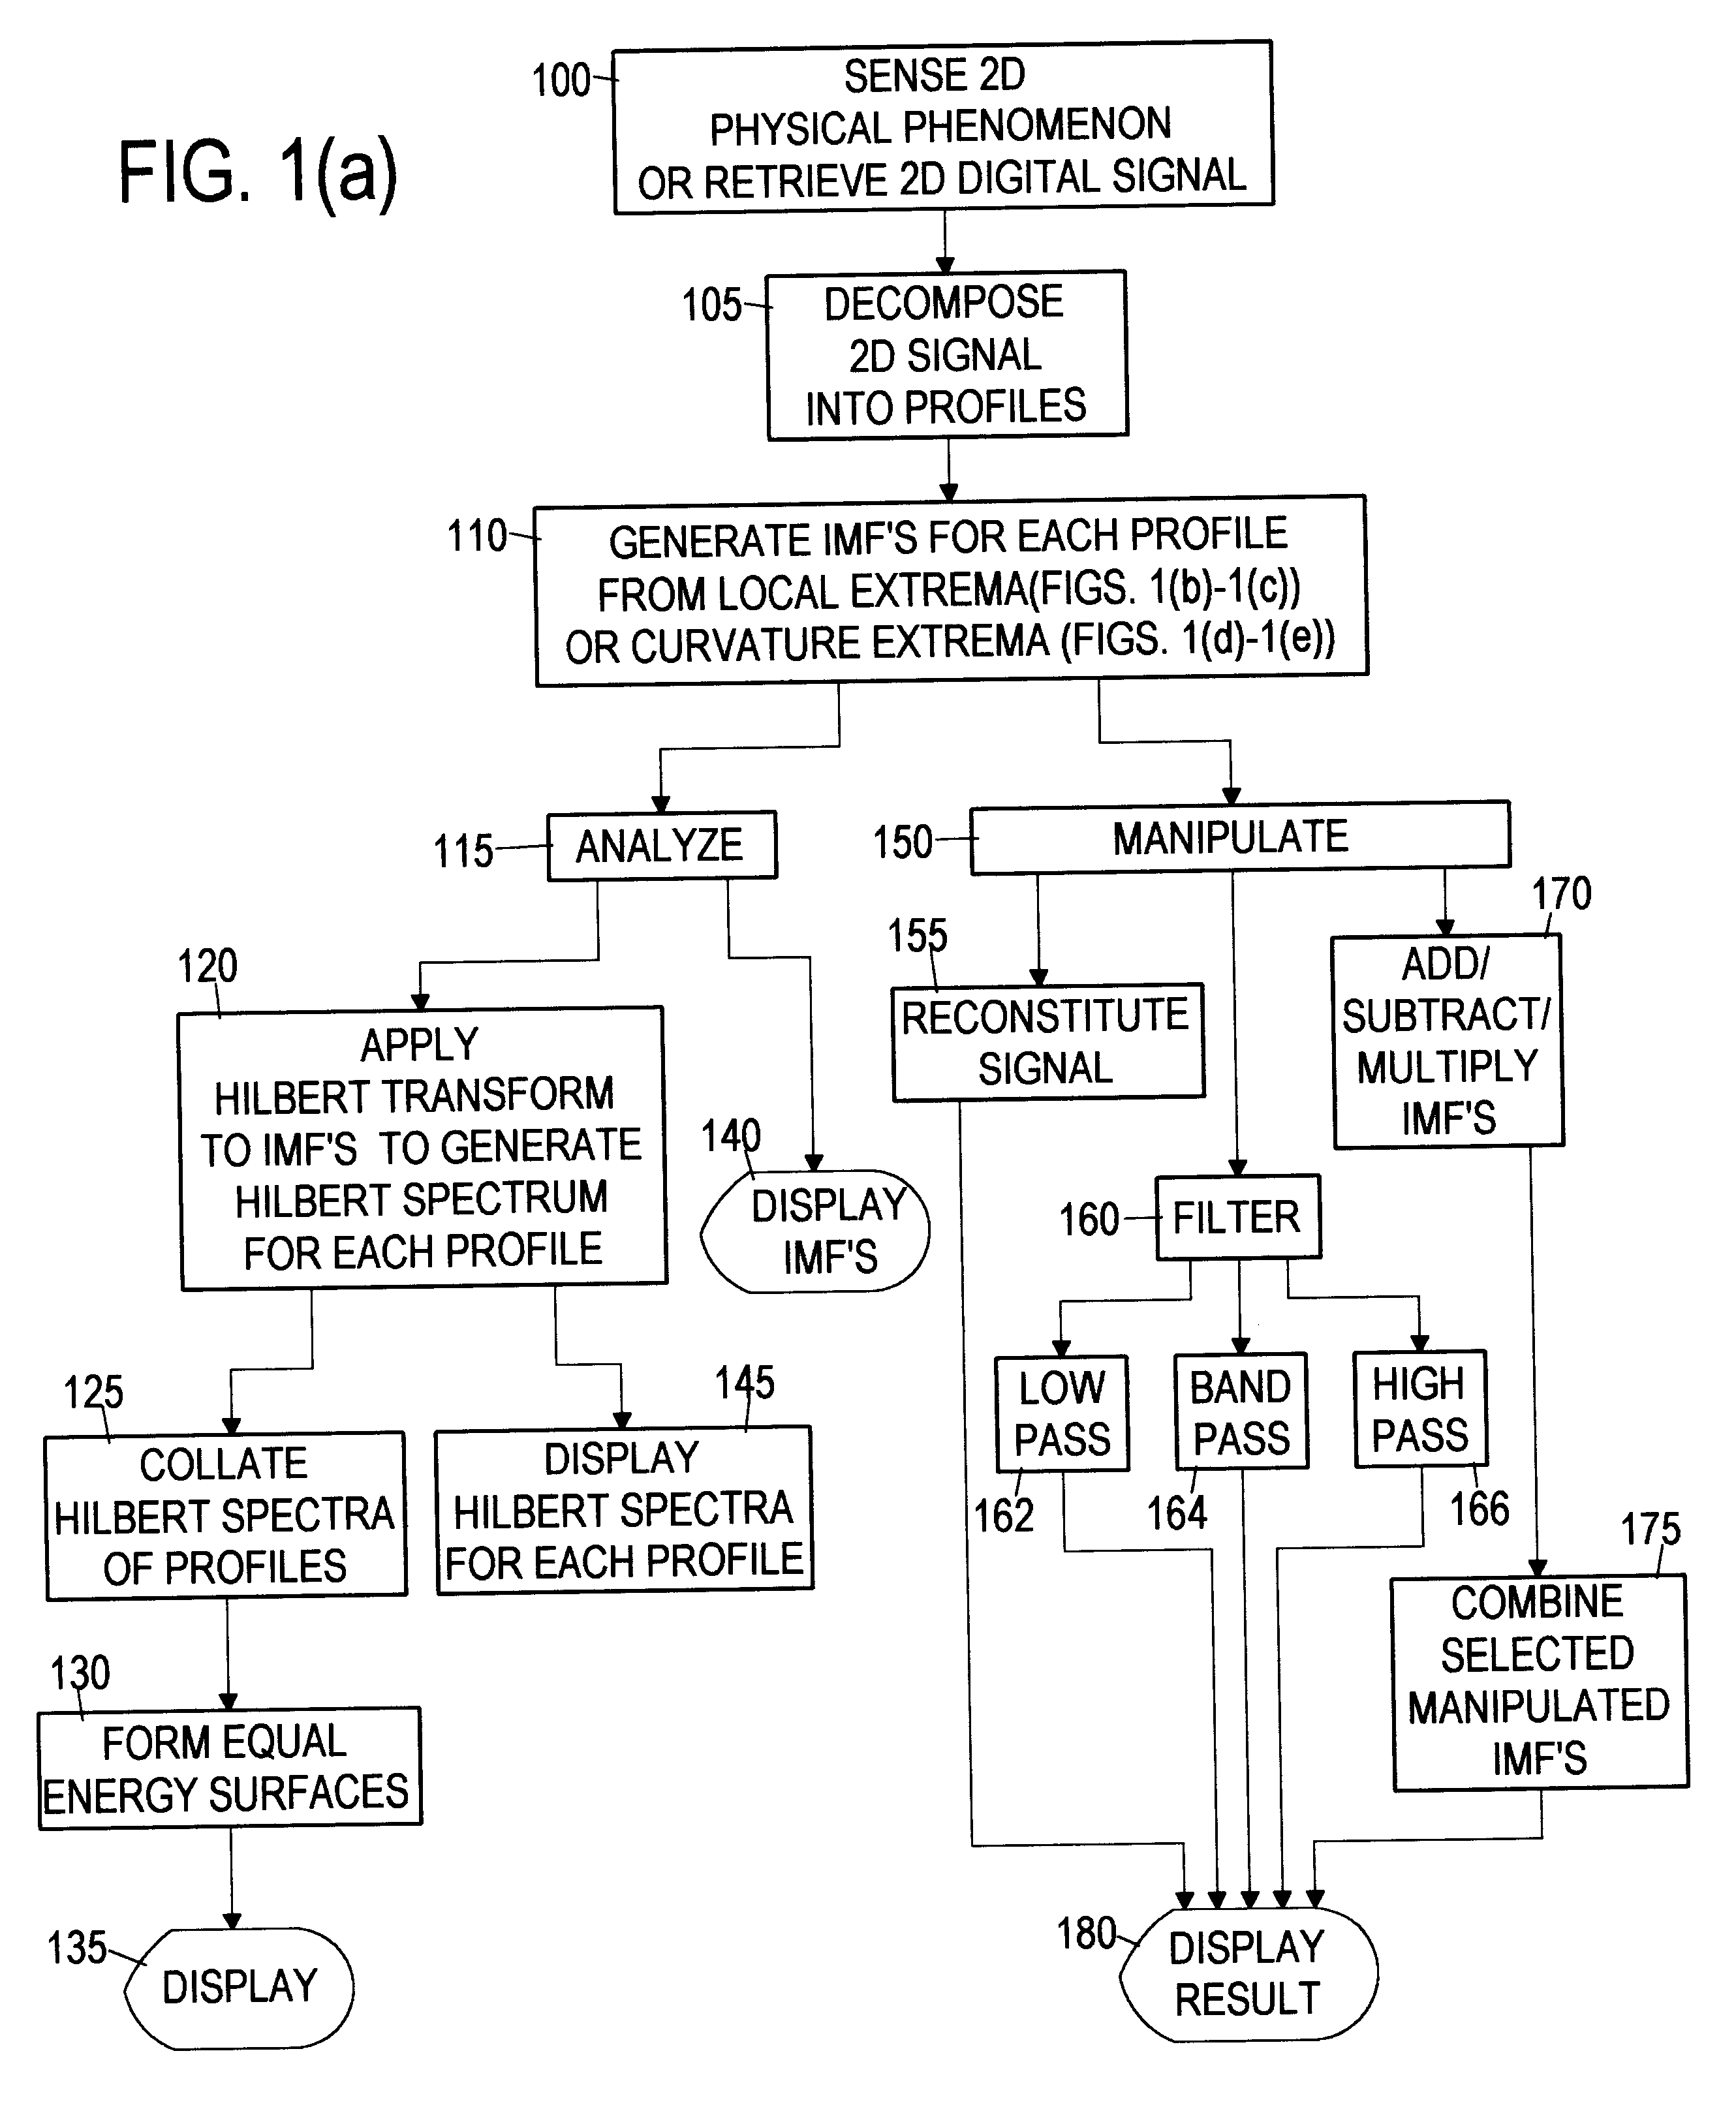 Computer implemented empirical mode decomposition method, apparatus, and article of manufacture for two-dimensional signals